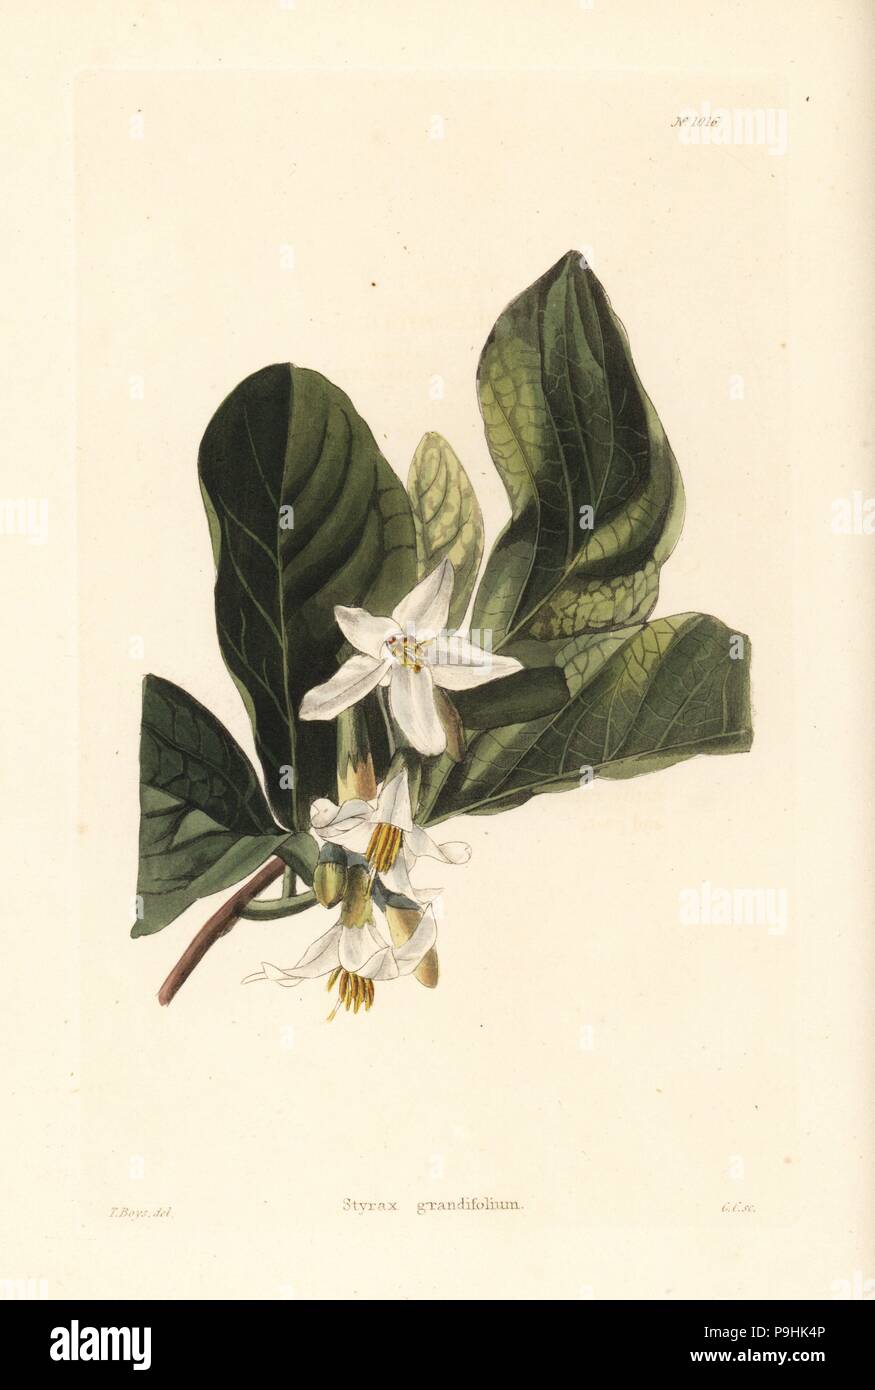 Bigleaf snowbell or storax, Styrax grandifolium. Handcoloured copperplate engraving by George Cooke after Thomas Shotter Boys from Conrad Loddiges' Botanical Cabinet, Hackney, 1825. Stock Photo